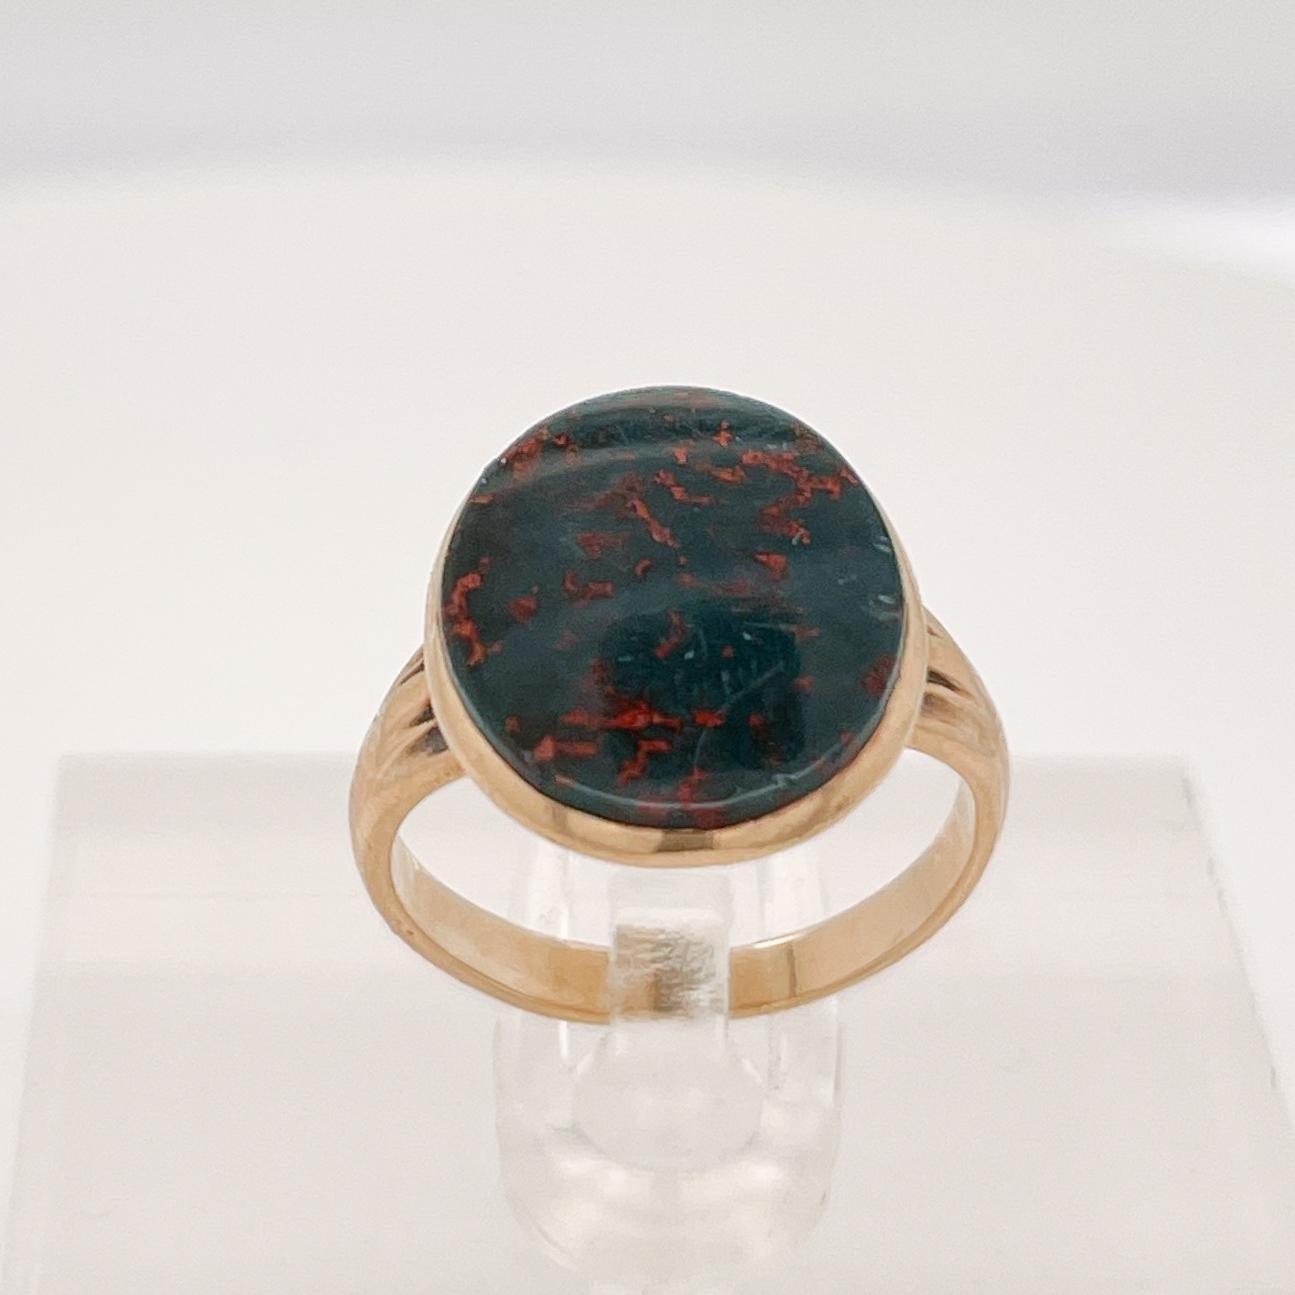 Antique Signed Edwardian 14 Karat Gold & Bloodstone Cabochon Signet Ring In Good Condition For Sale In Philadelphia, PA